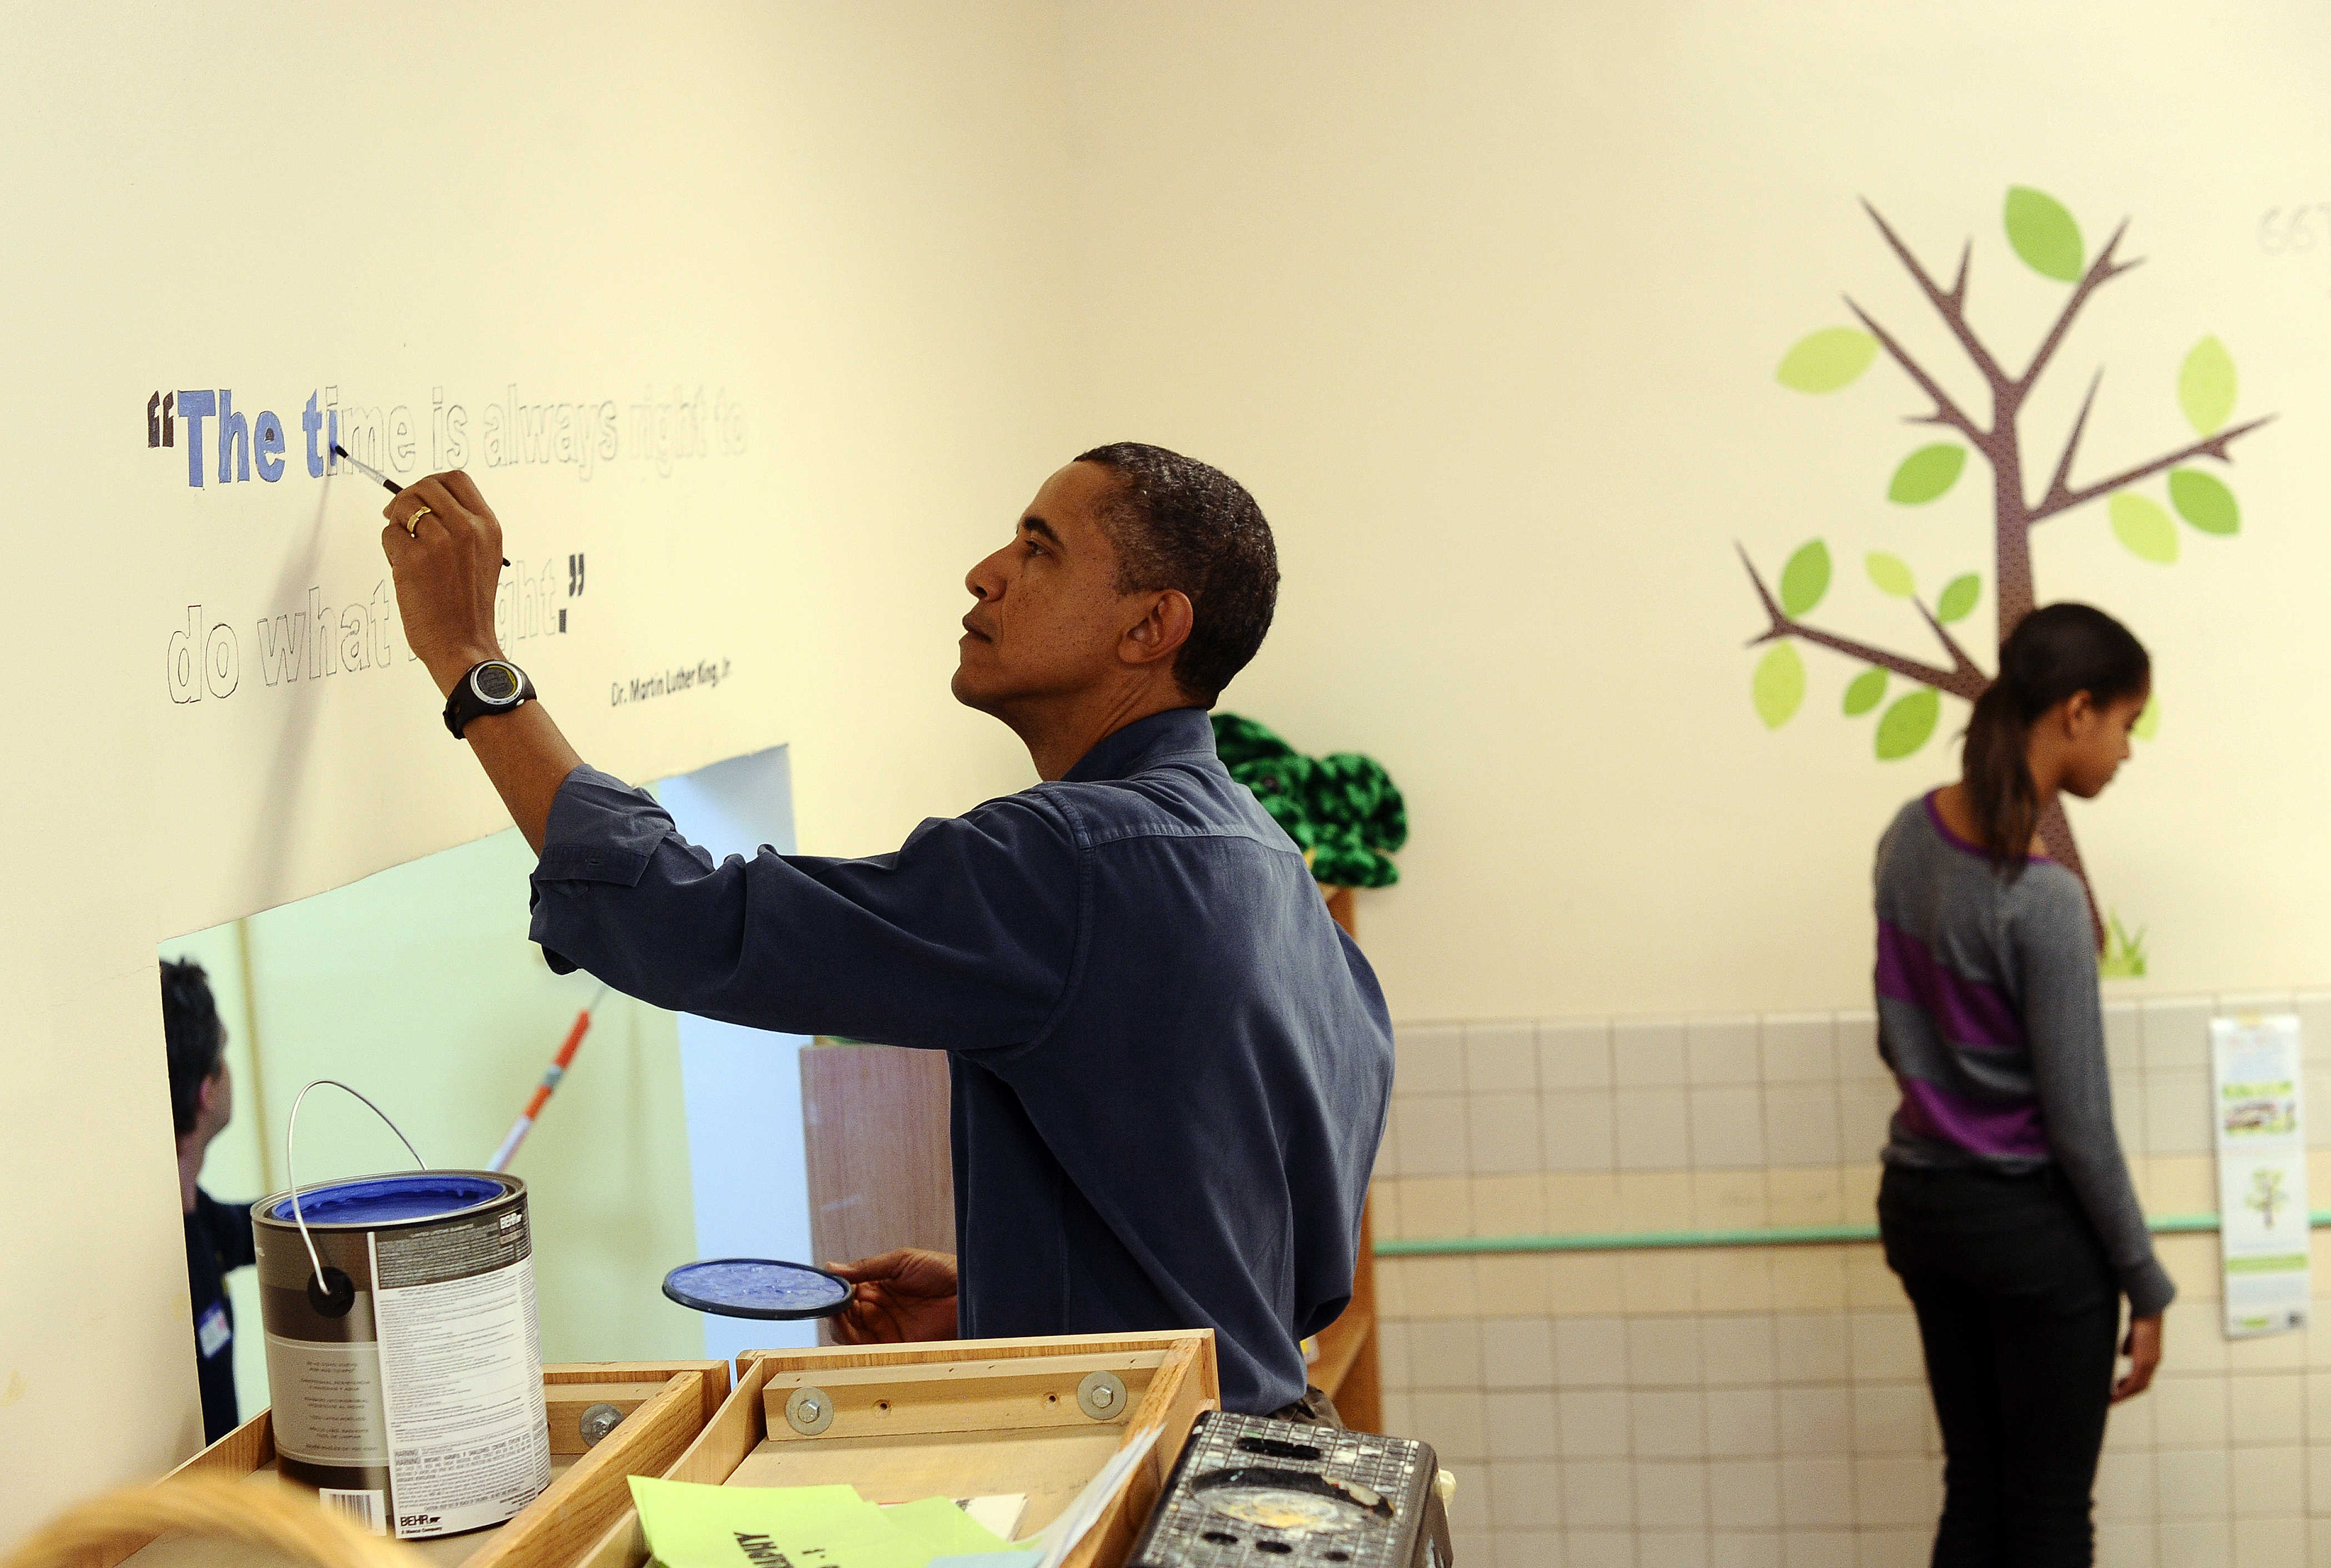 US President Barack Obama (L) paints a quote of Martin Luther King Jr. on the wall of a library at the Browne Education Center in Washington, D.C., on January 16, 2012, as taking part in a community service project. (Jewel Samad&mdash;AFP/Getty Images)